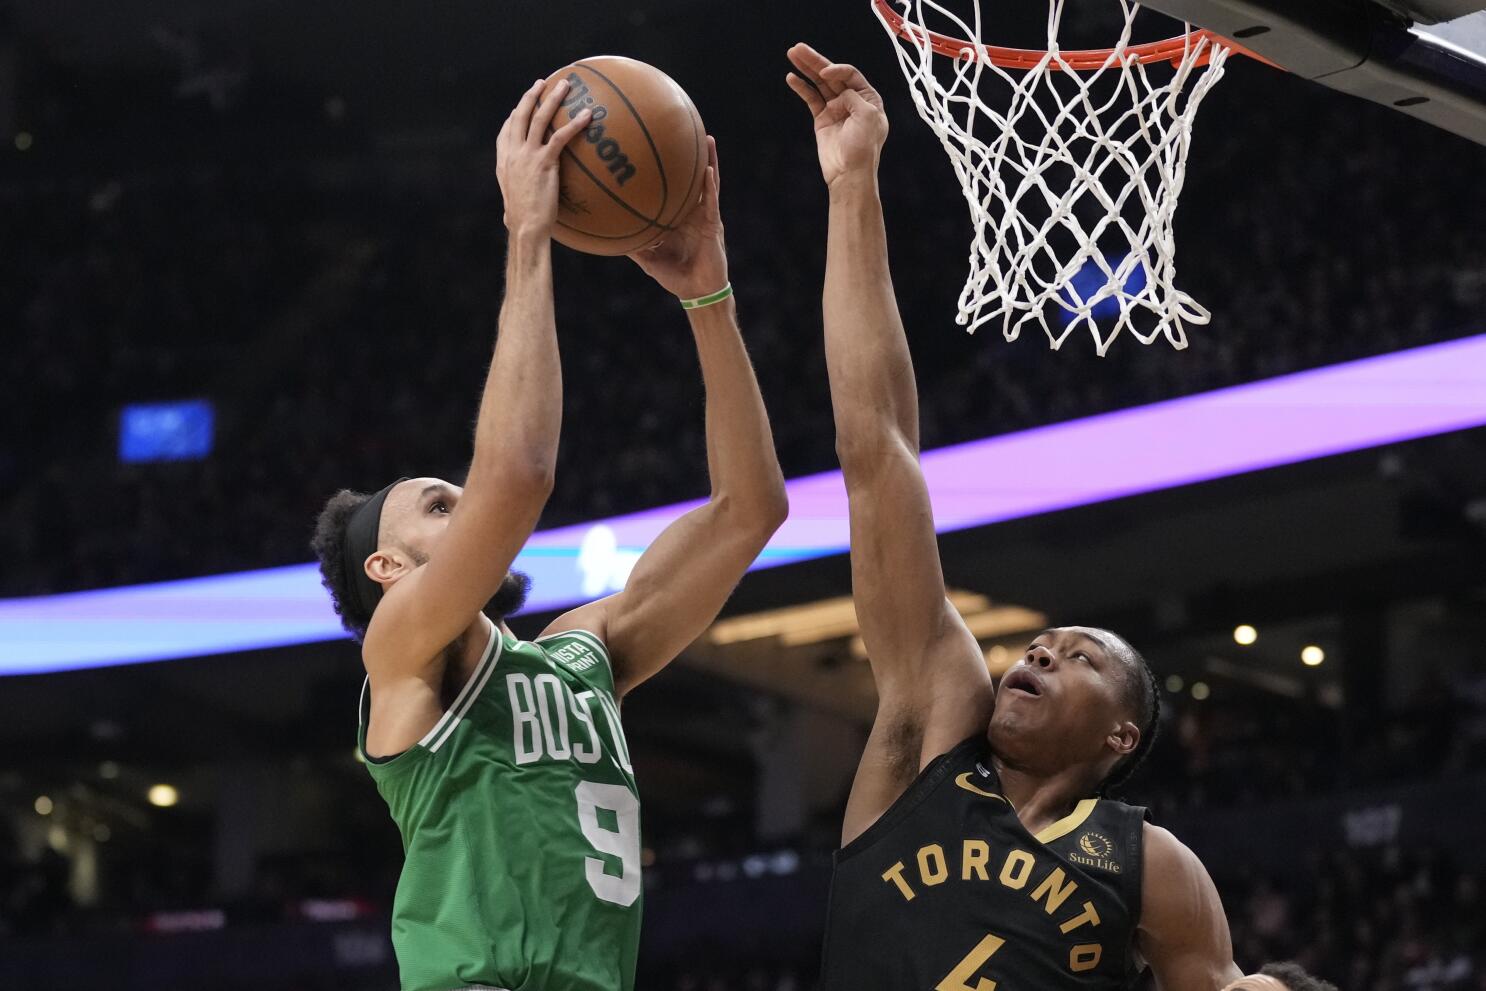 Celtics' Grant Williams shoots his way into Boston folklore with  career-best performance in Game 7 vs. Bucks 